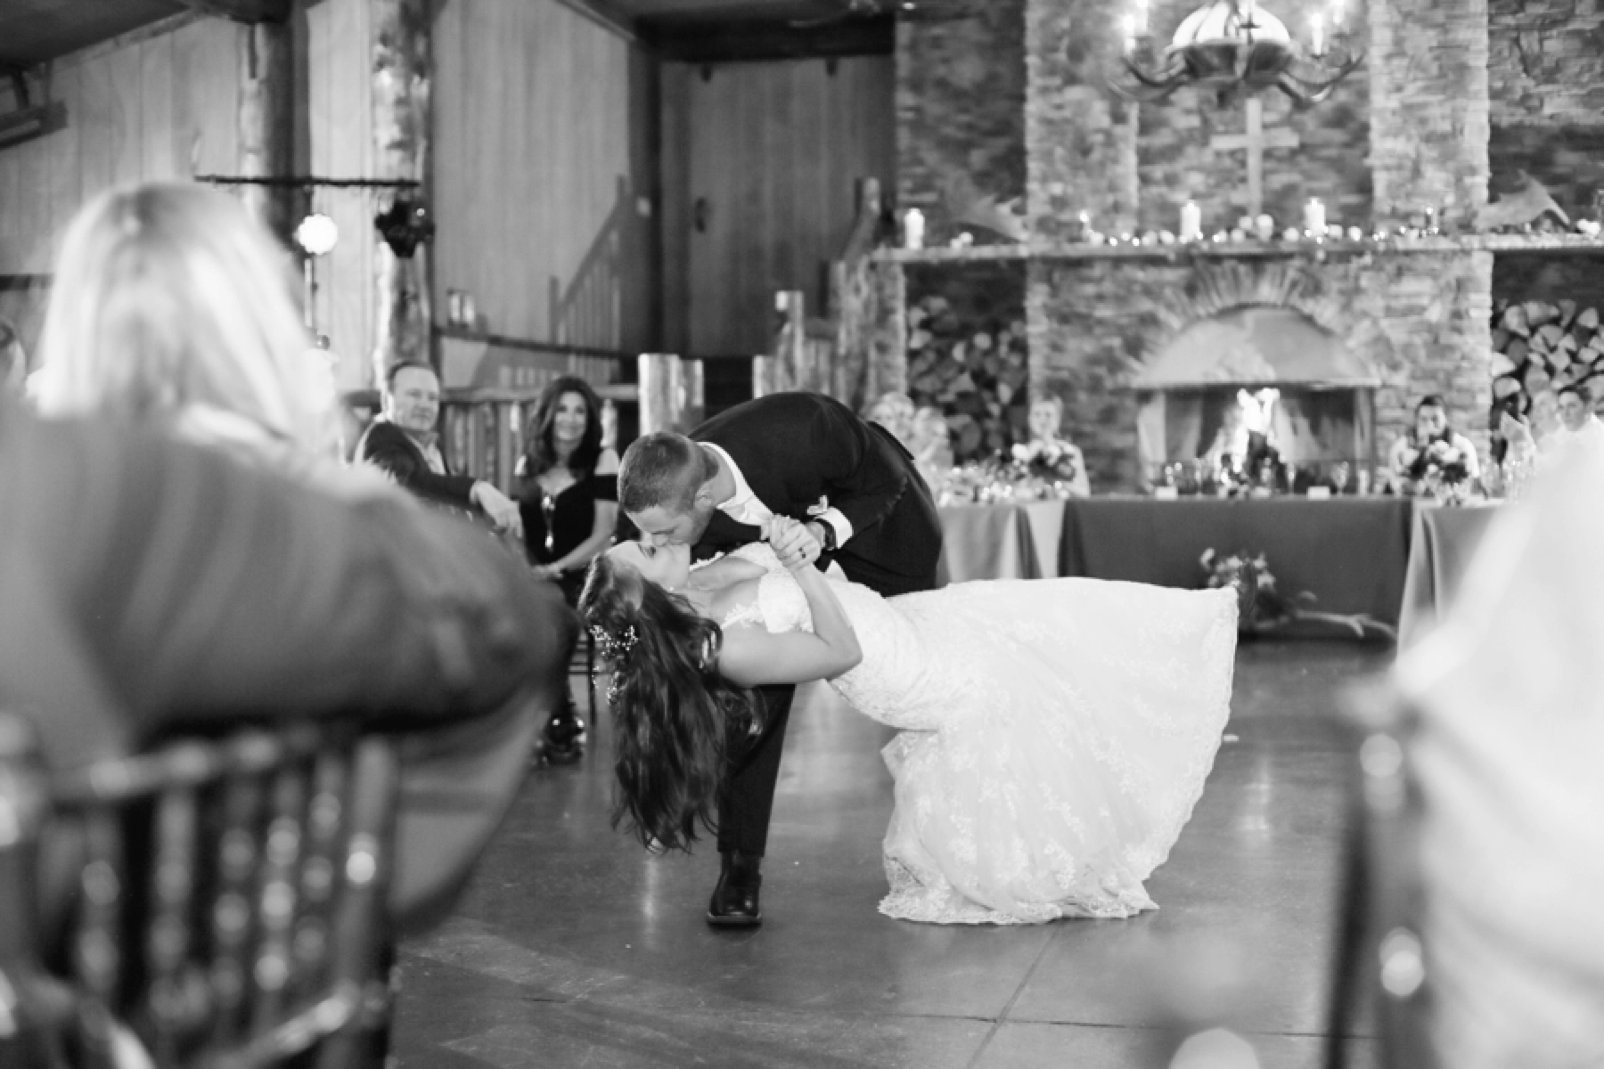 first dance during reception at spruce mountain ranch wedding